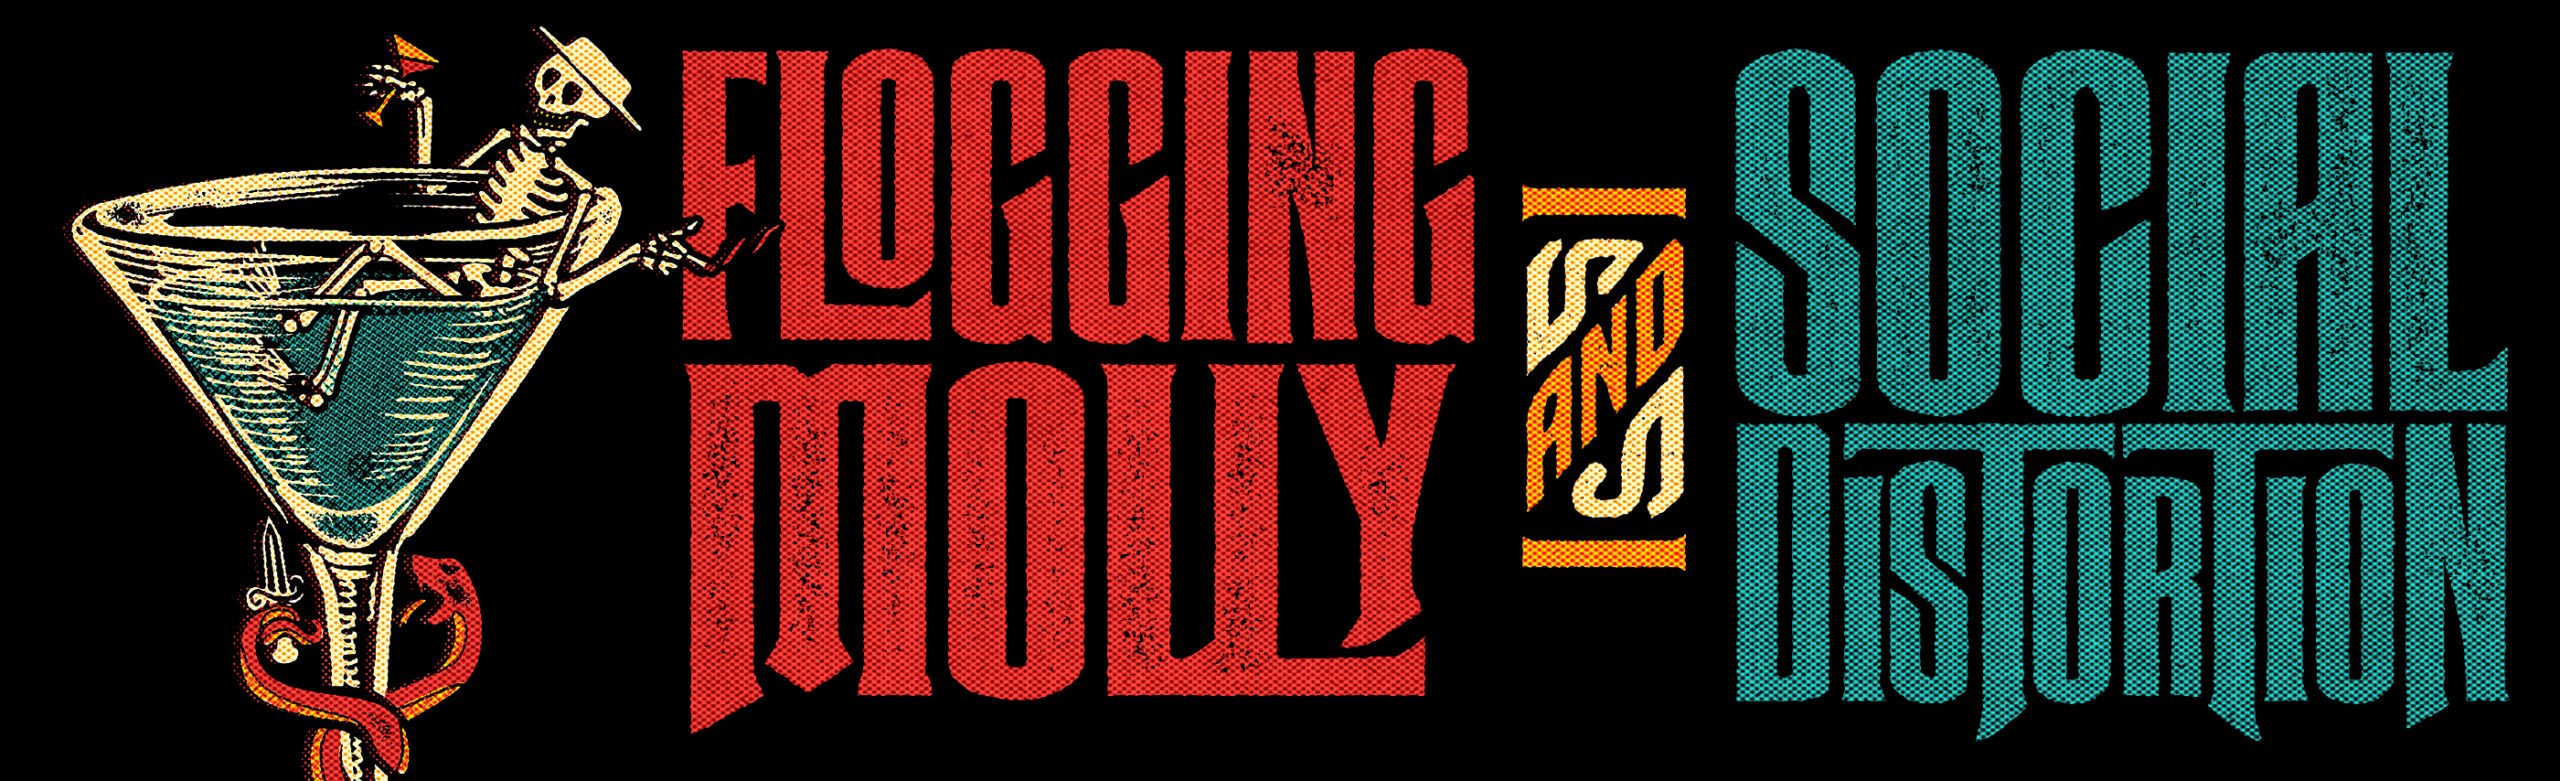 Event Info: Flogging Molly and Social Distortion at KettleHouse Amphitheater 2019 Image